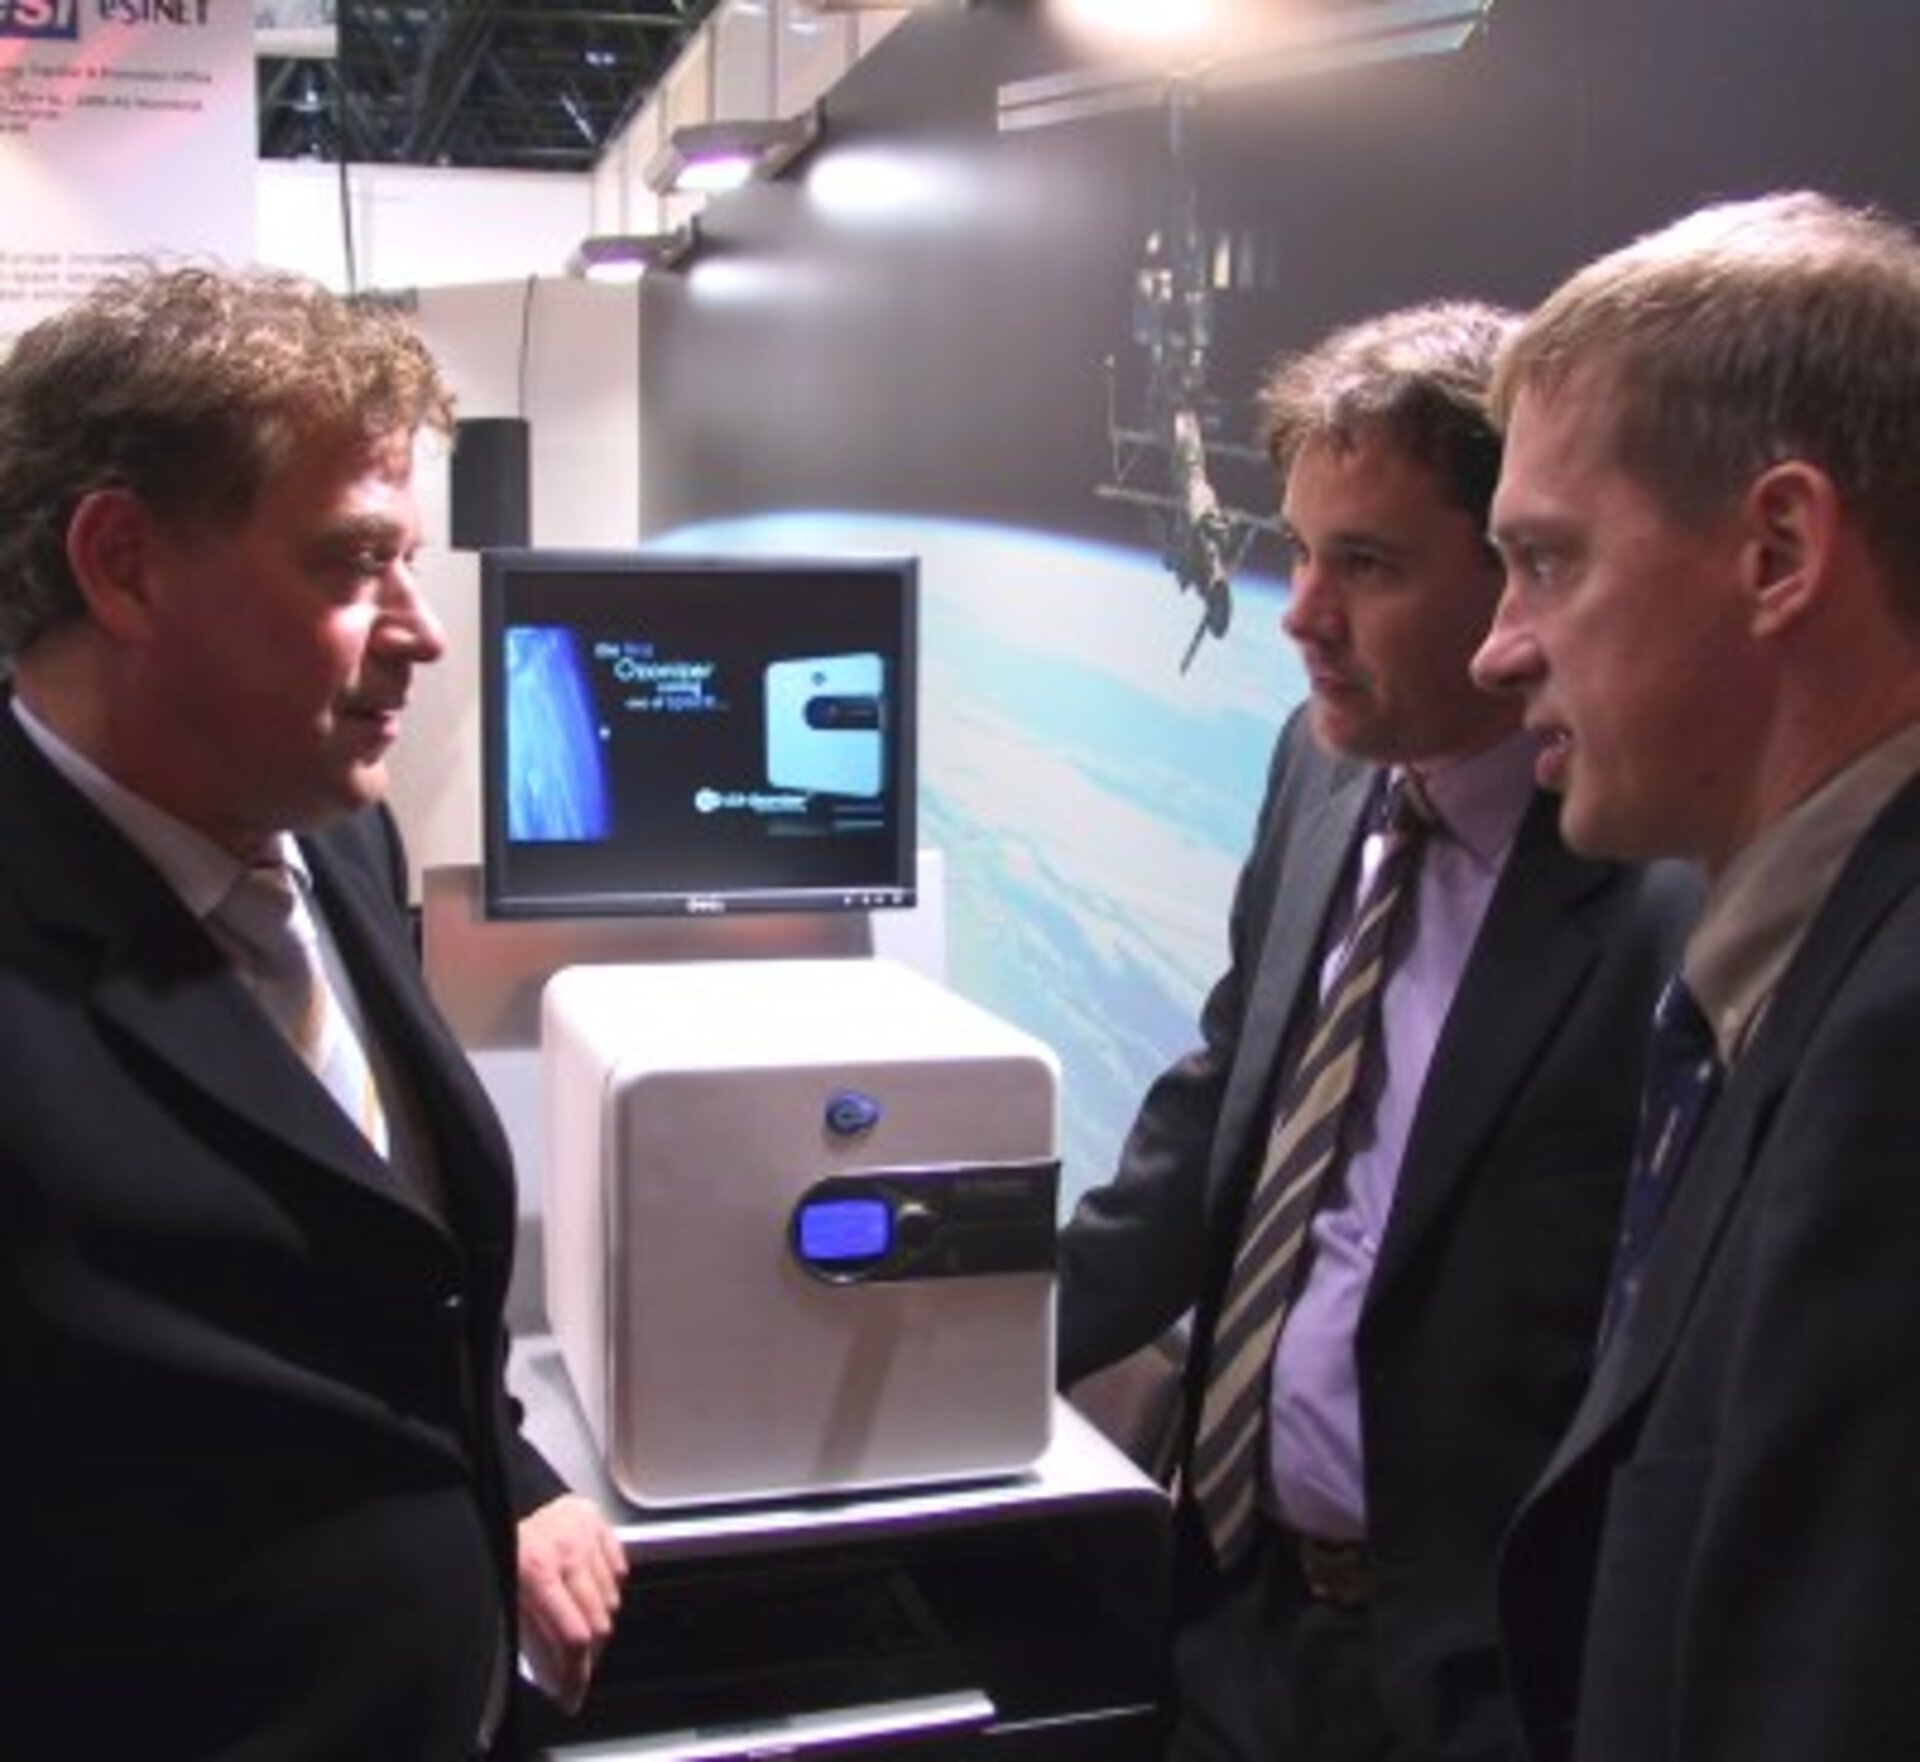 The O3-Ozonizer is presented at Medica 2005